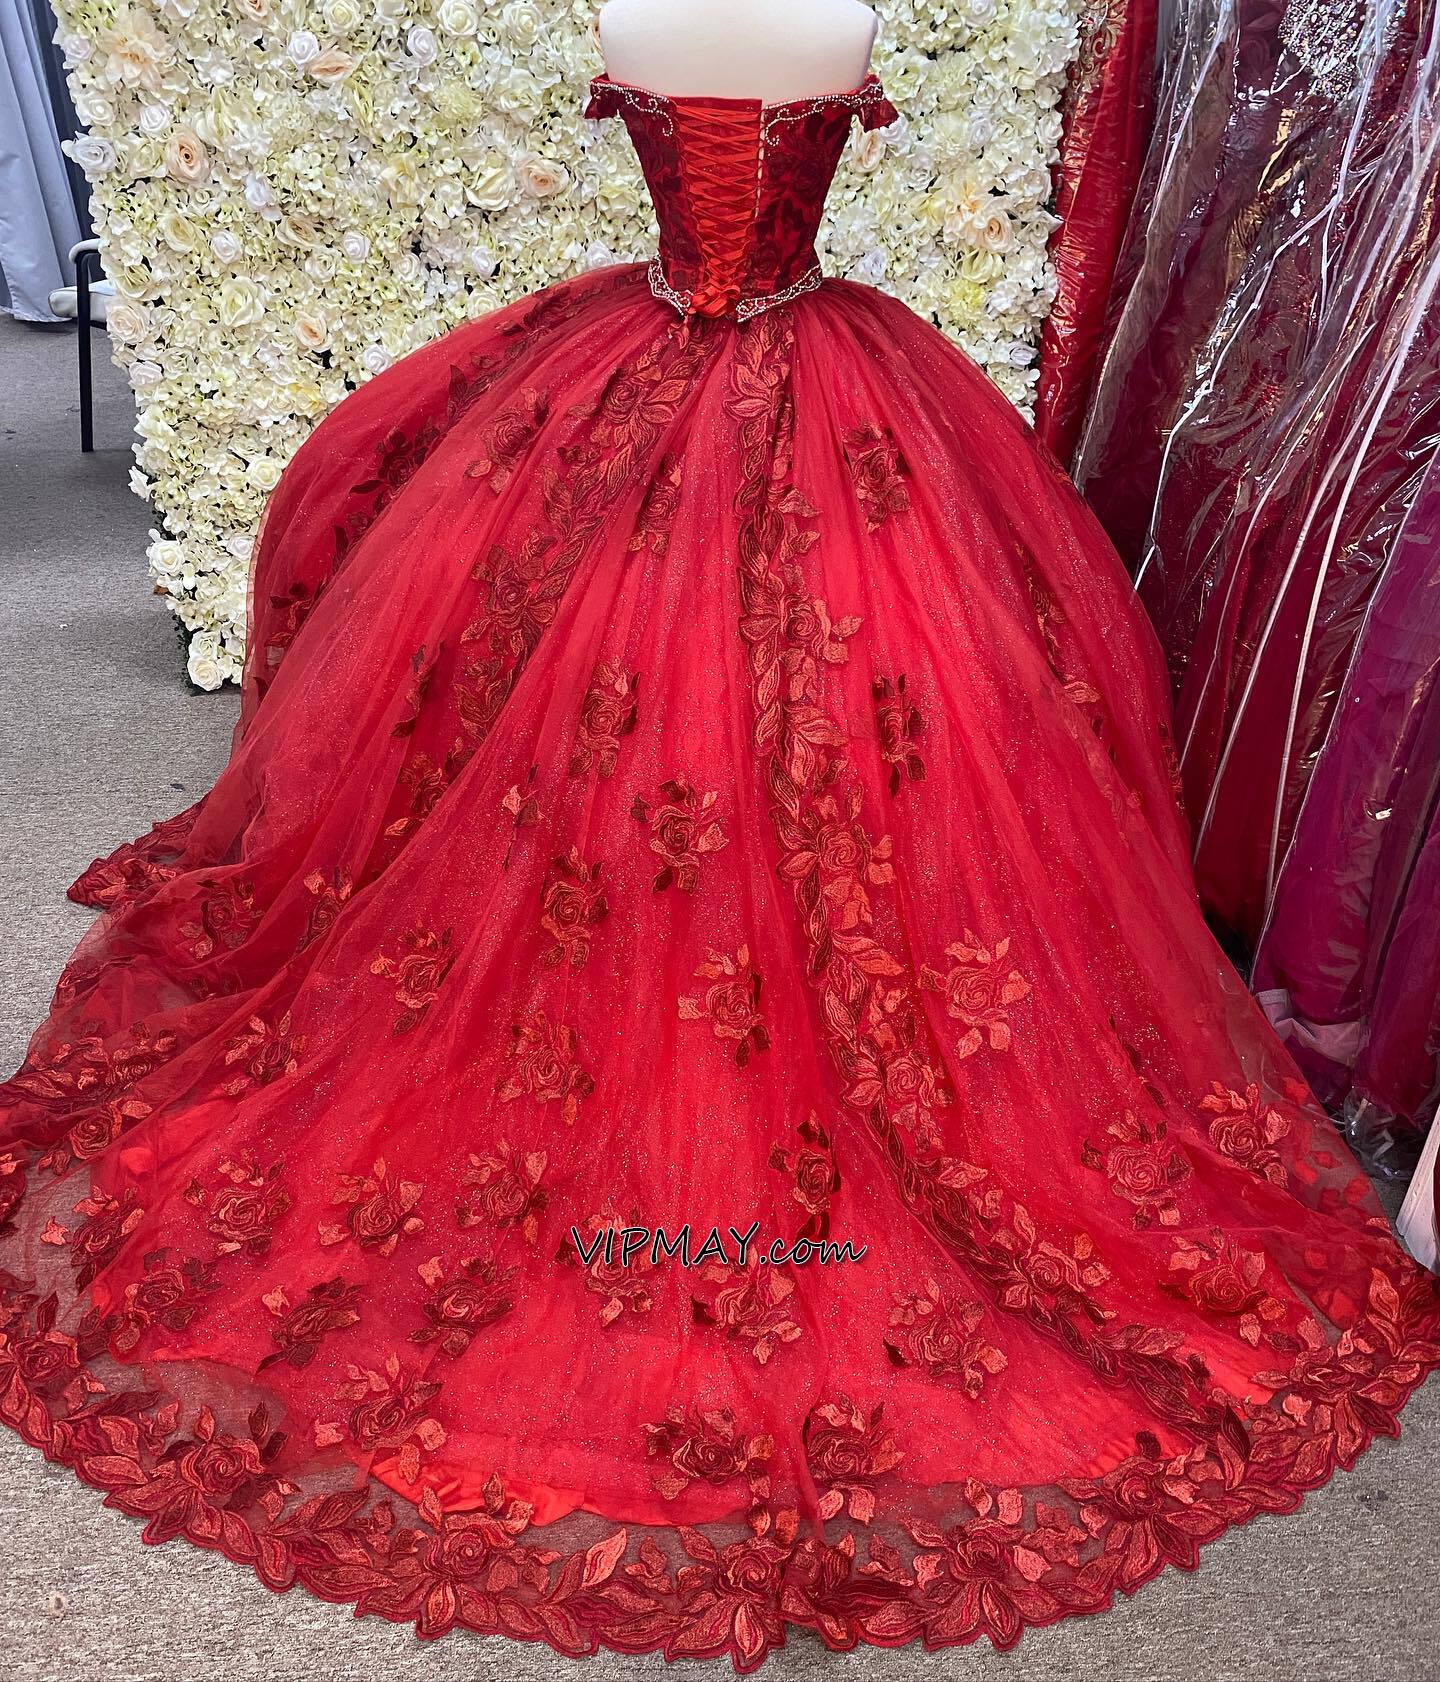 wine colored quinceanera dress,floral two piece quinceanera dress,two piece modern quinceanera dress,quinceanera dress lace puffy elegant,quinceanera dress with short train,corset quinceanera dress,lace back up quinceanera dress,